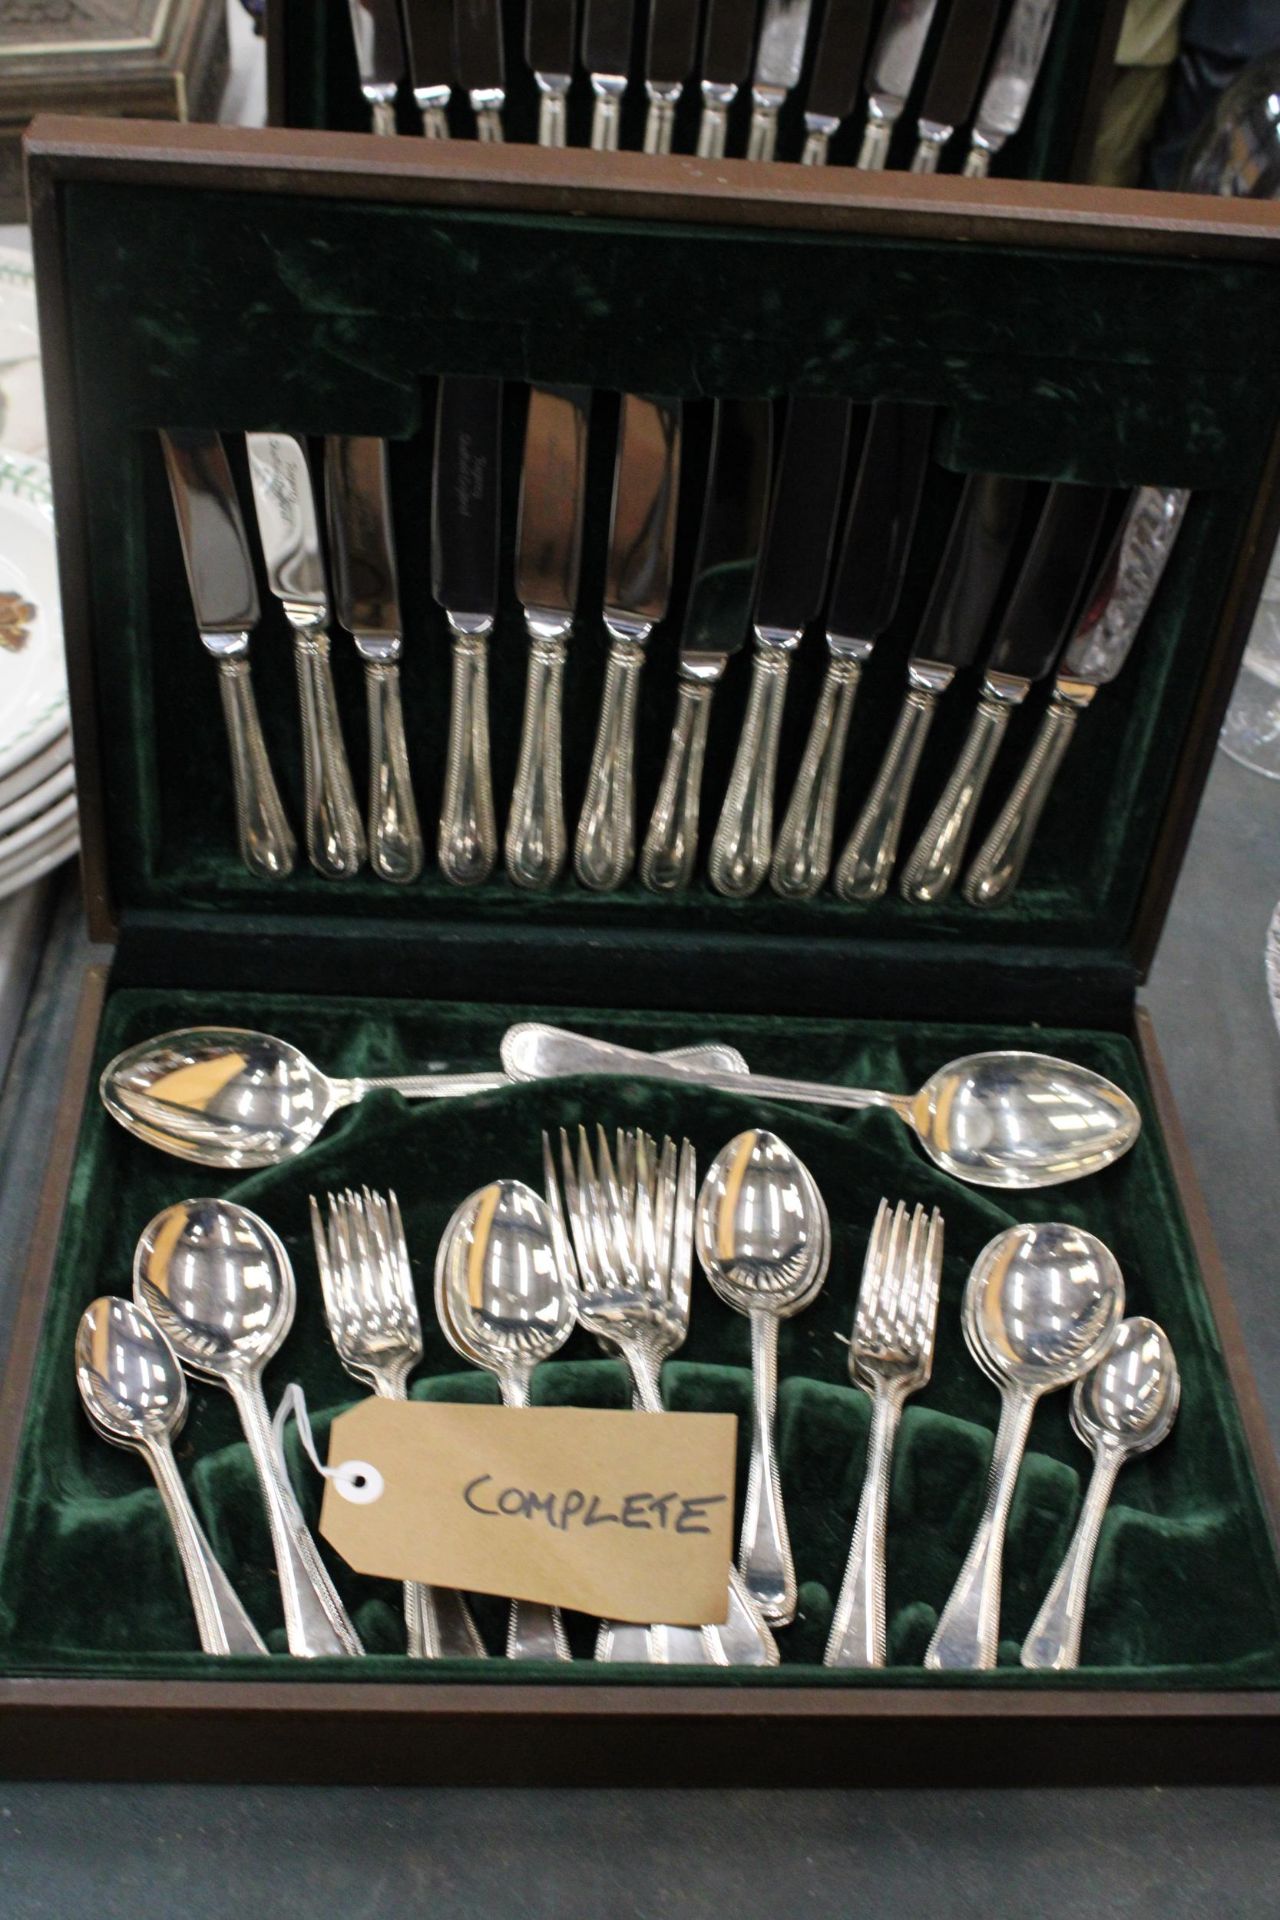 TWO CASED CANTEENS OF CUTLERY, ONE IS COMPLETE, THE OTHER HAS THREE TEASPOONS MISSING - Image 2 of 8